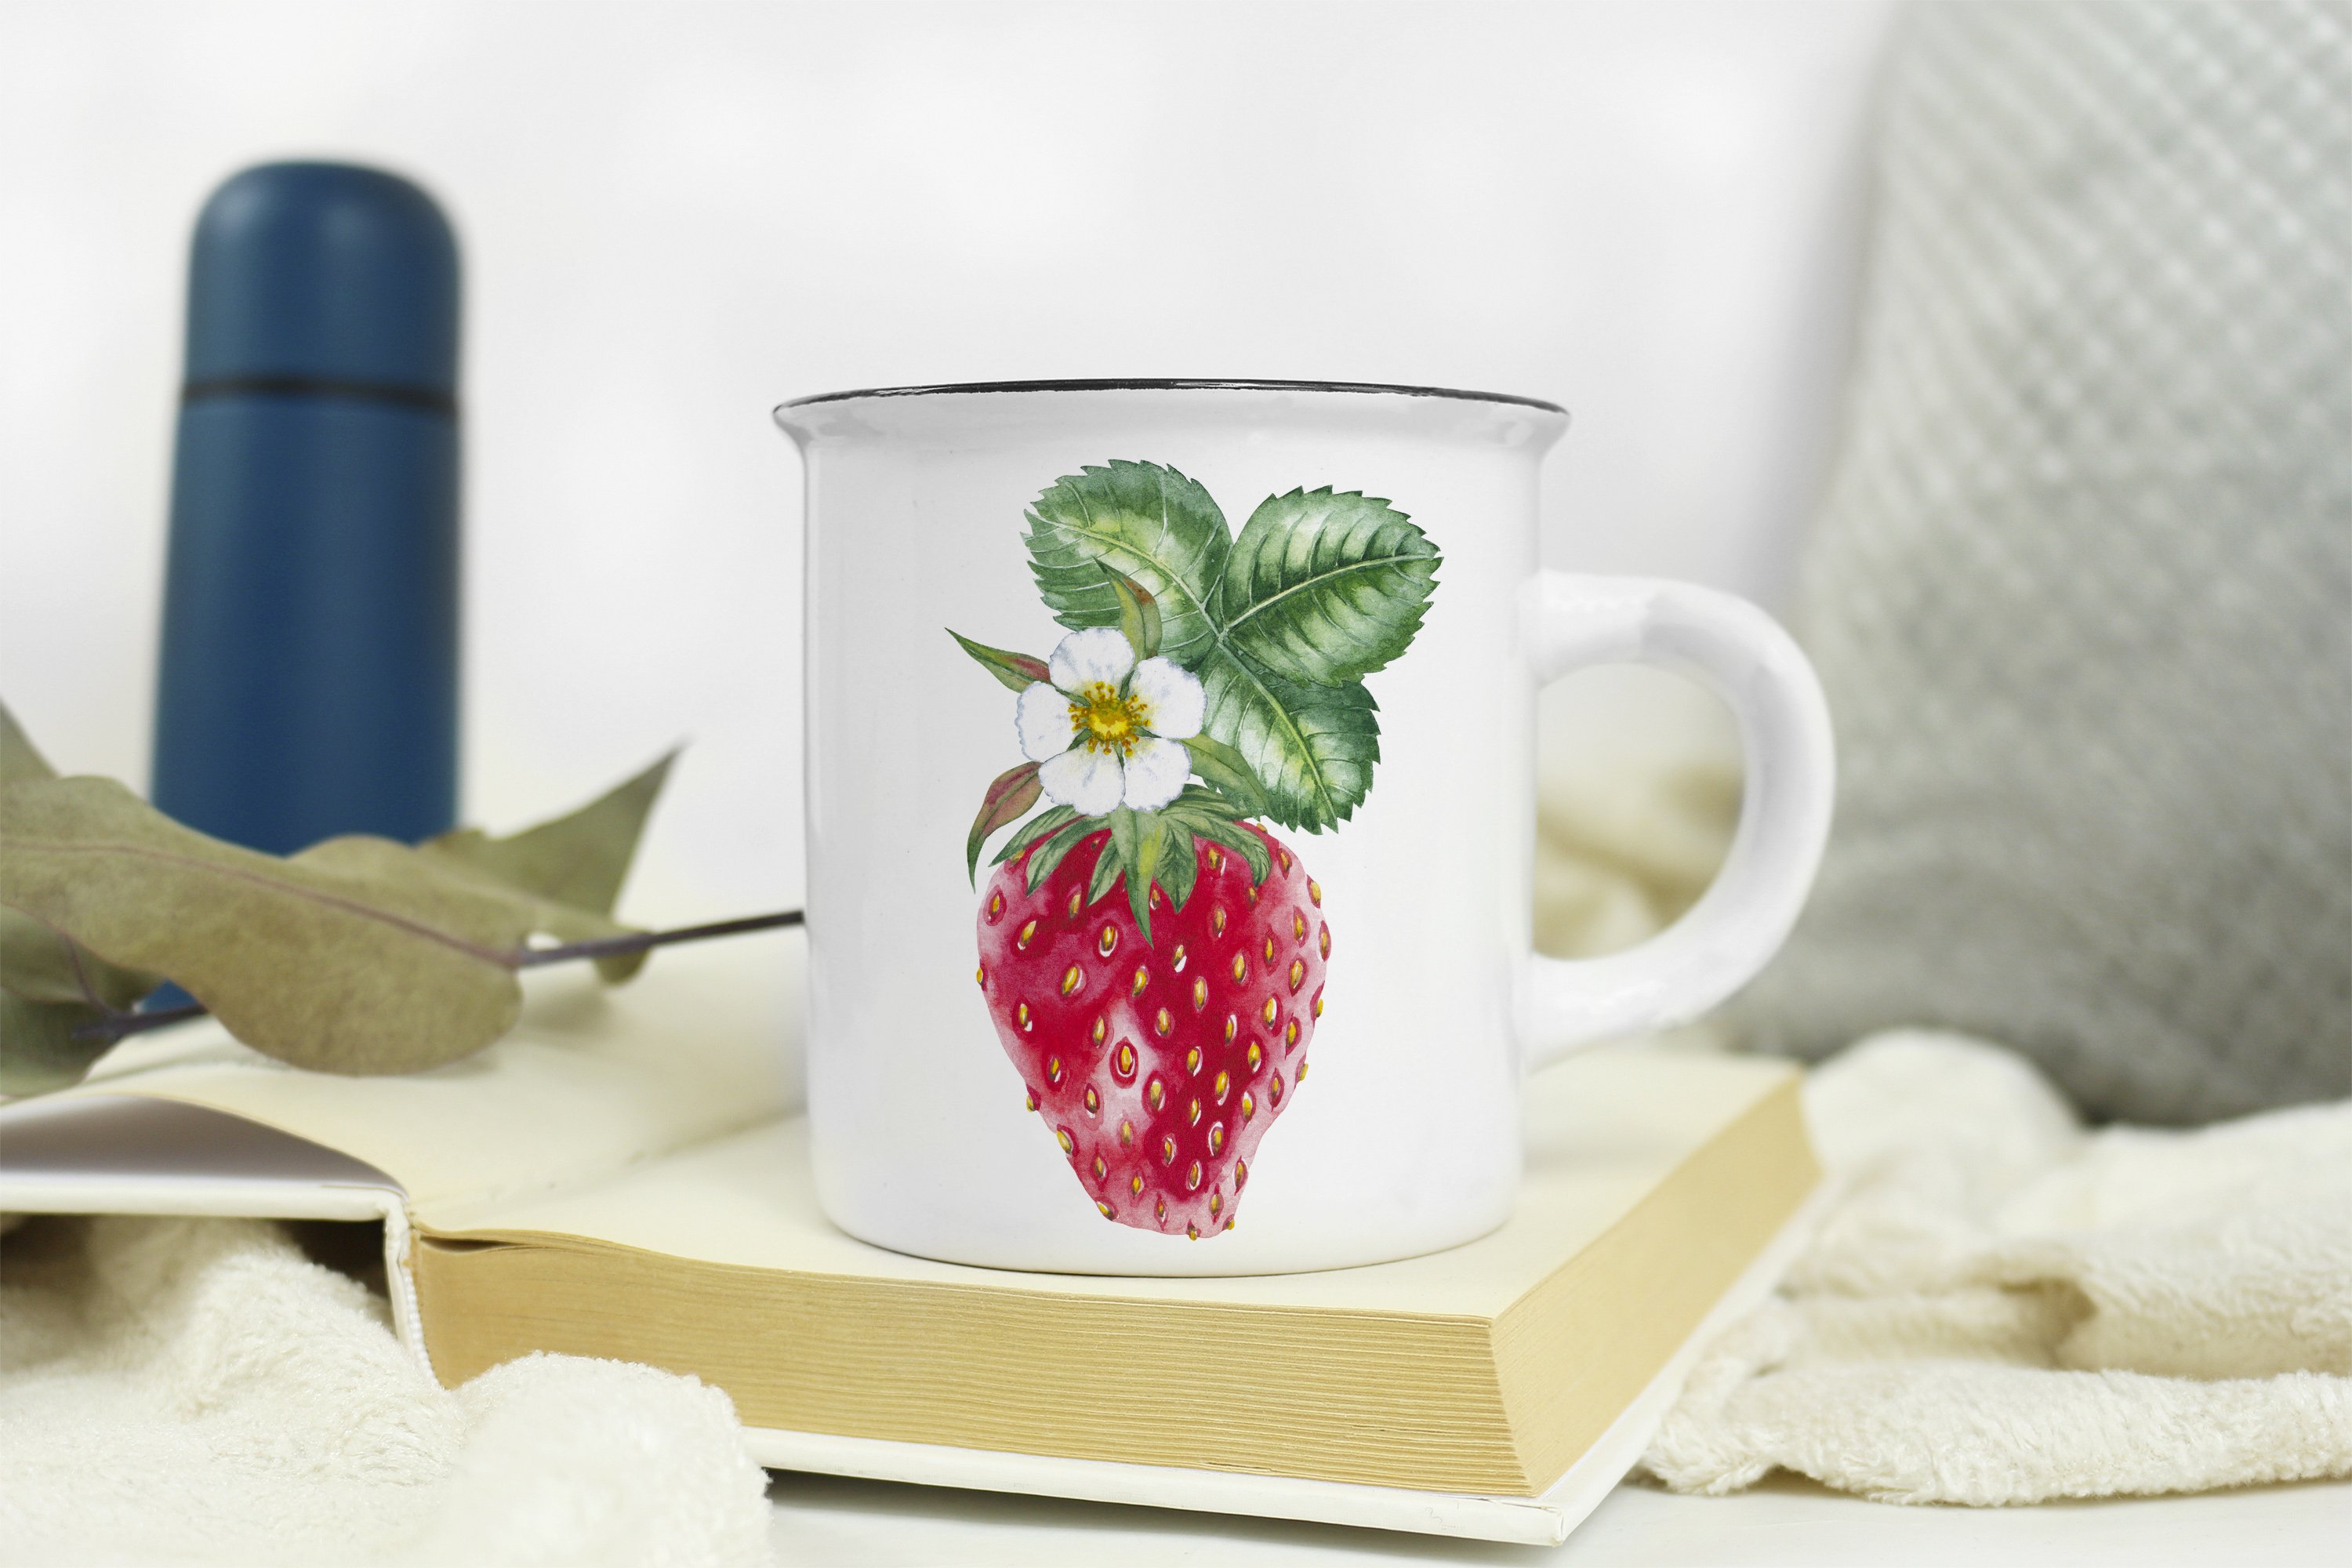 White cup on a book with illustration of a strawberry.